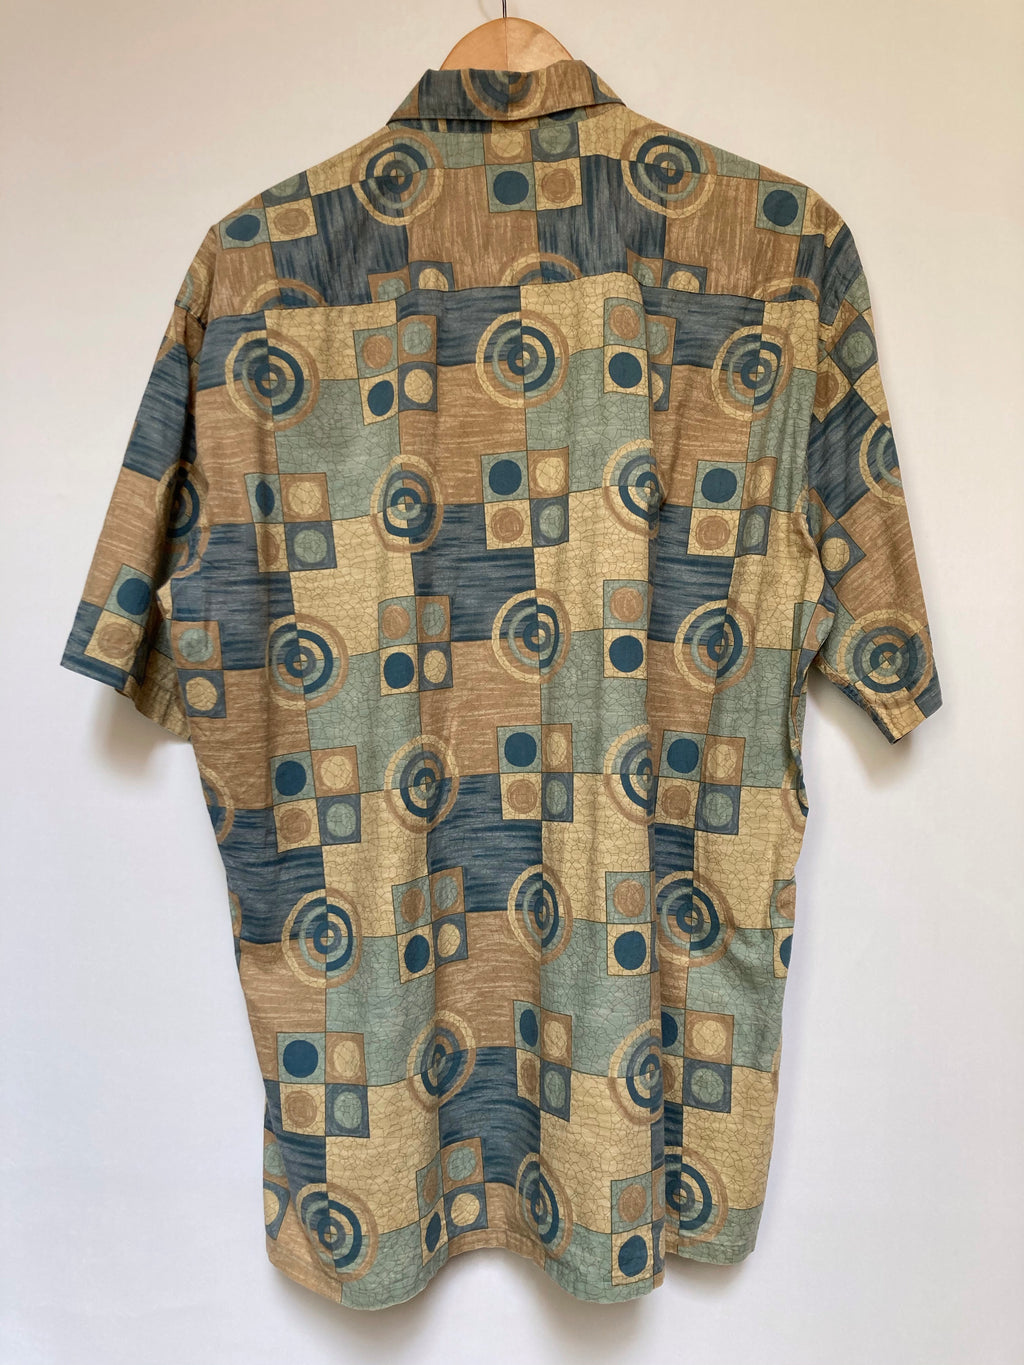 Poliwhirl Party Shirt